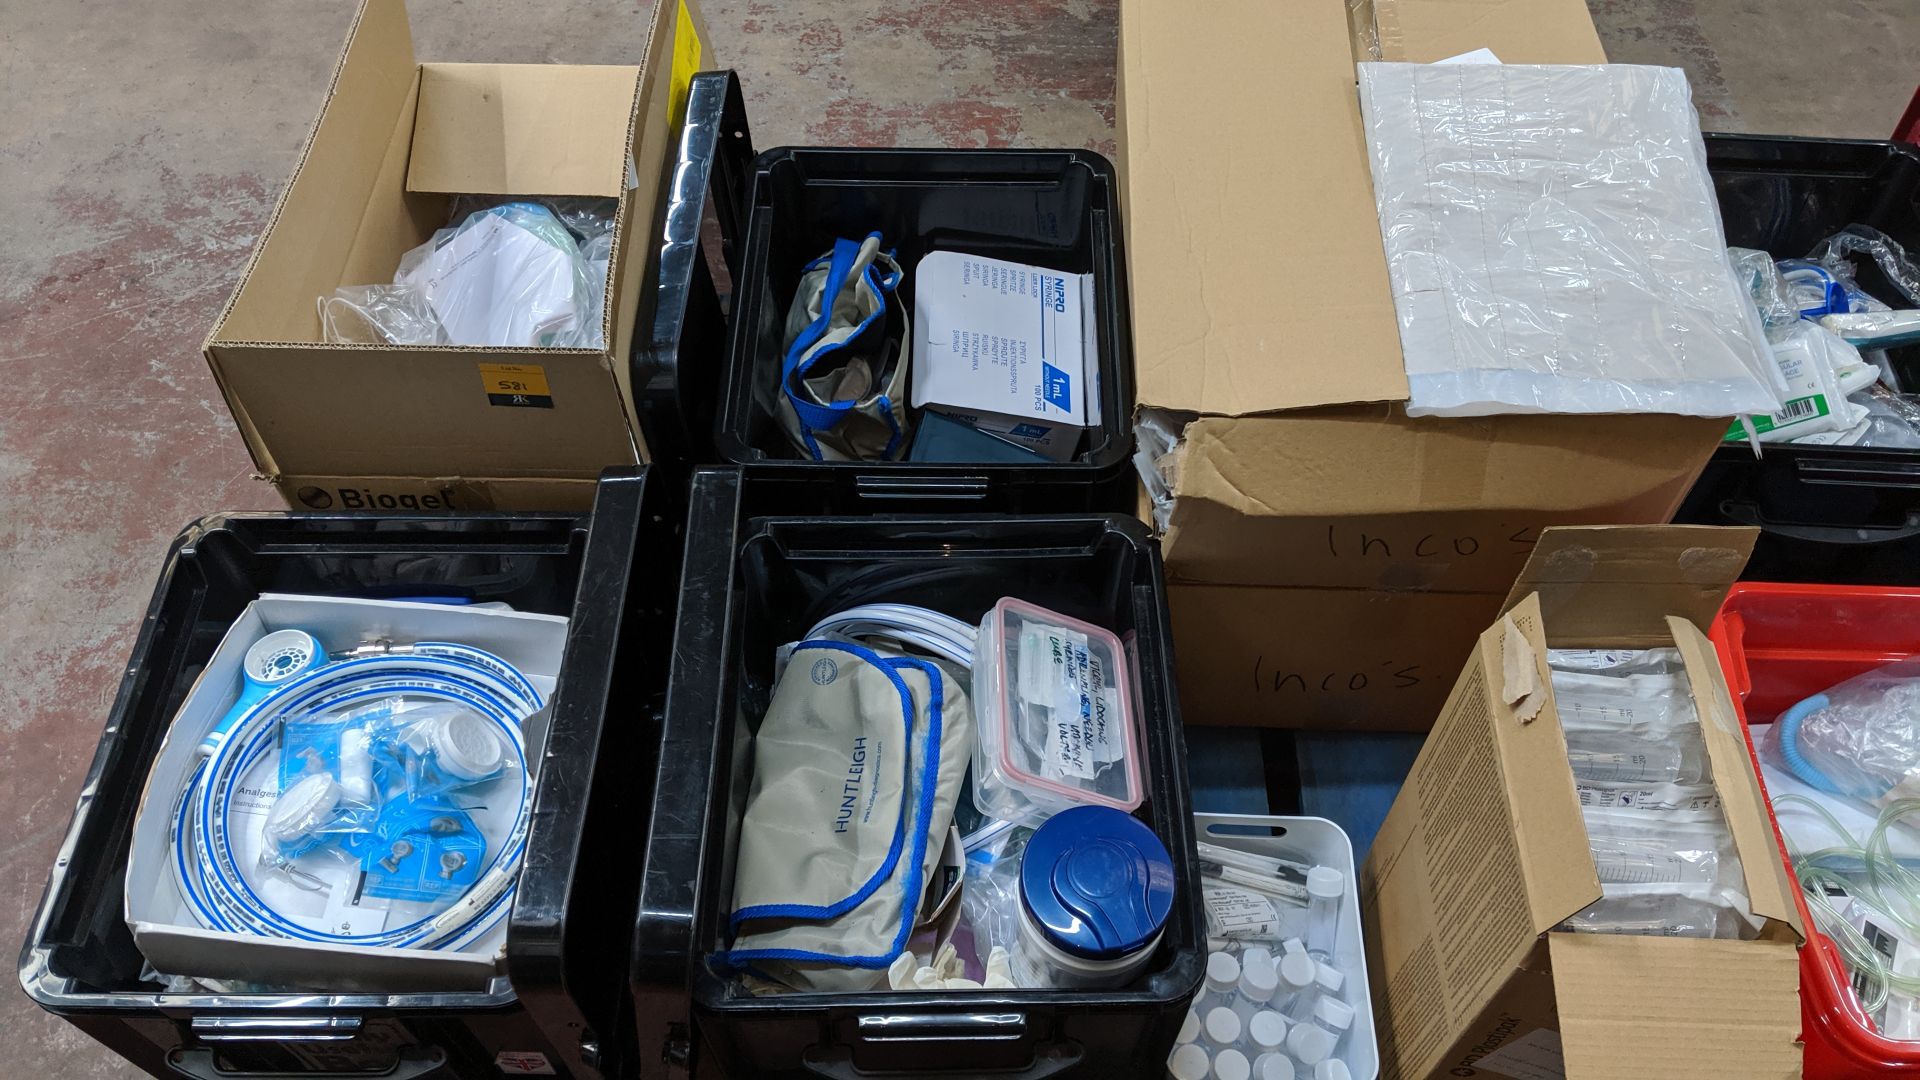 Contents of a pallet of assorted medical supplies including single use resuscitators, Analgesic